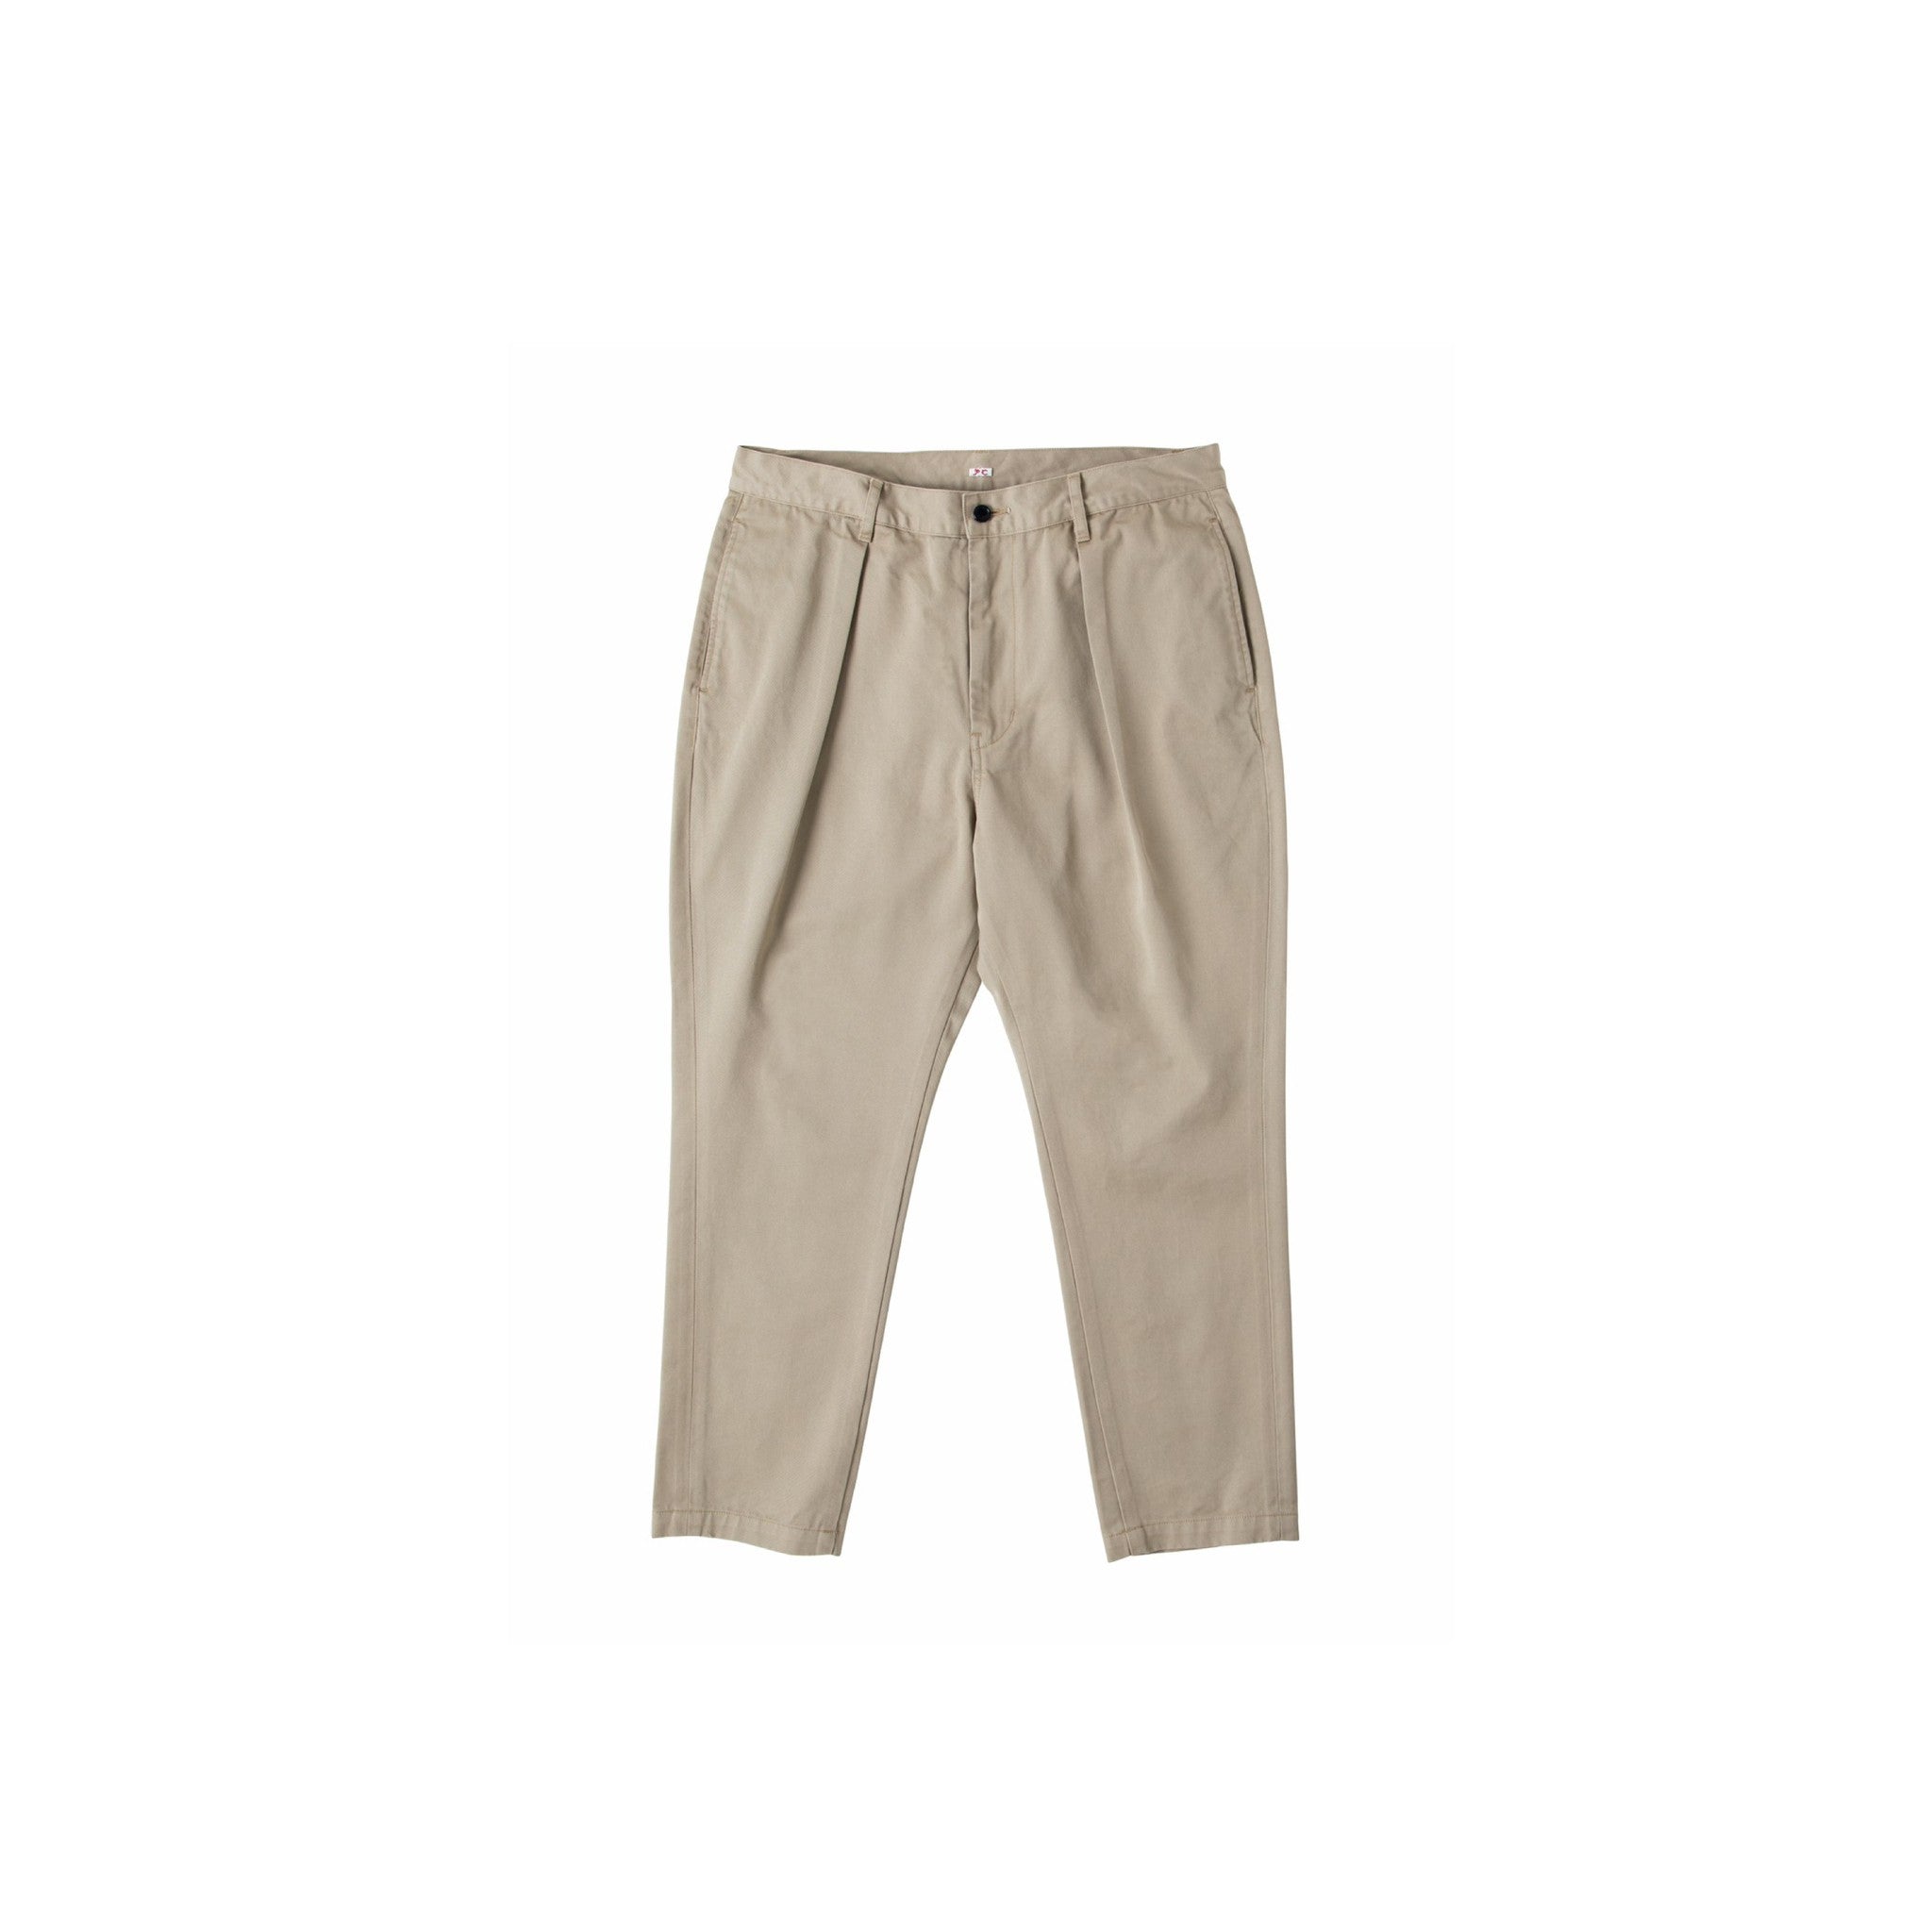 ASTAIRE CHINOS – PORTER CLASSIC KYOTO